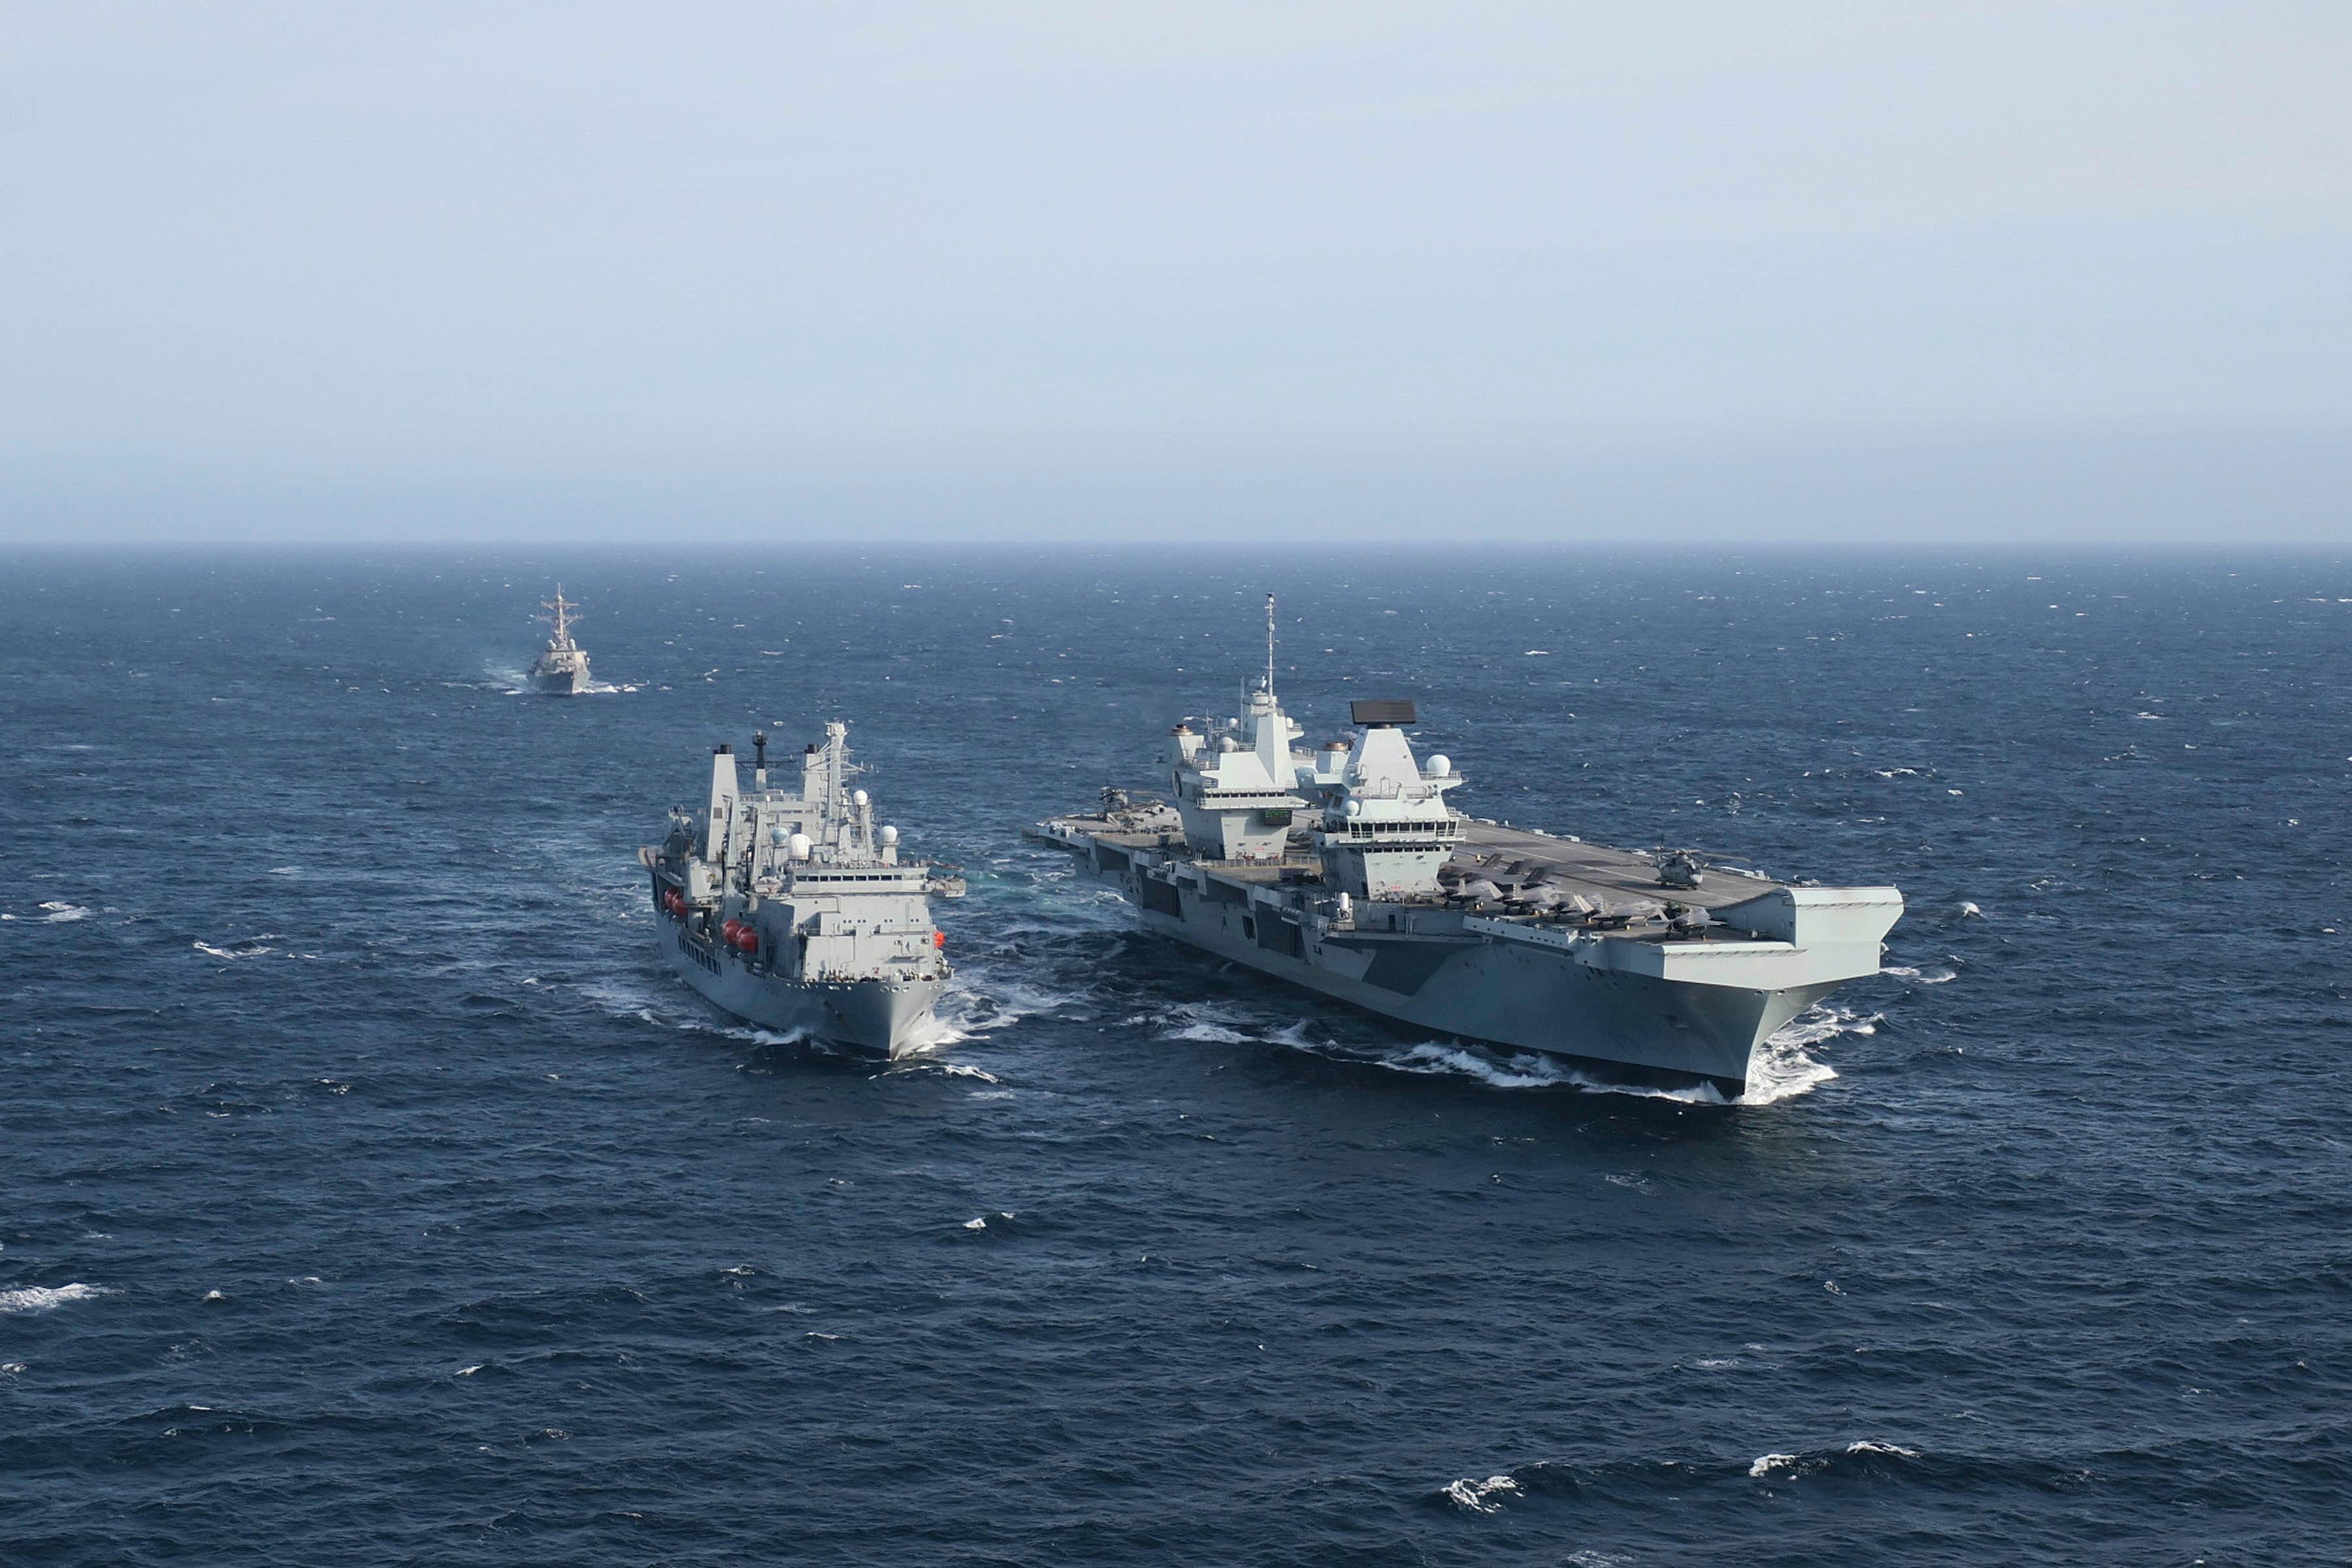 USS The Sullivans sails behind Her Majesty's Ship Queen Elizabeth as she conducted her first Replenishment at Sea (RAS) with RFA Fort Victoria in the North Sea on Sep 30 as part of Group Exercise 2020. RFA Fort Victoria has a crucial role to play in sustaining the reach, endurance and fighting power of Britain’s two new aircraft carriers, and their accompanying Strike Group. The 33,675 ton supply ship carries fuel, food, ammunition and other dry stores.